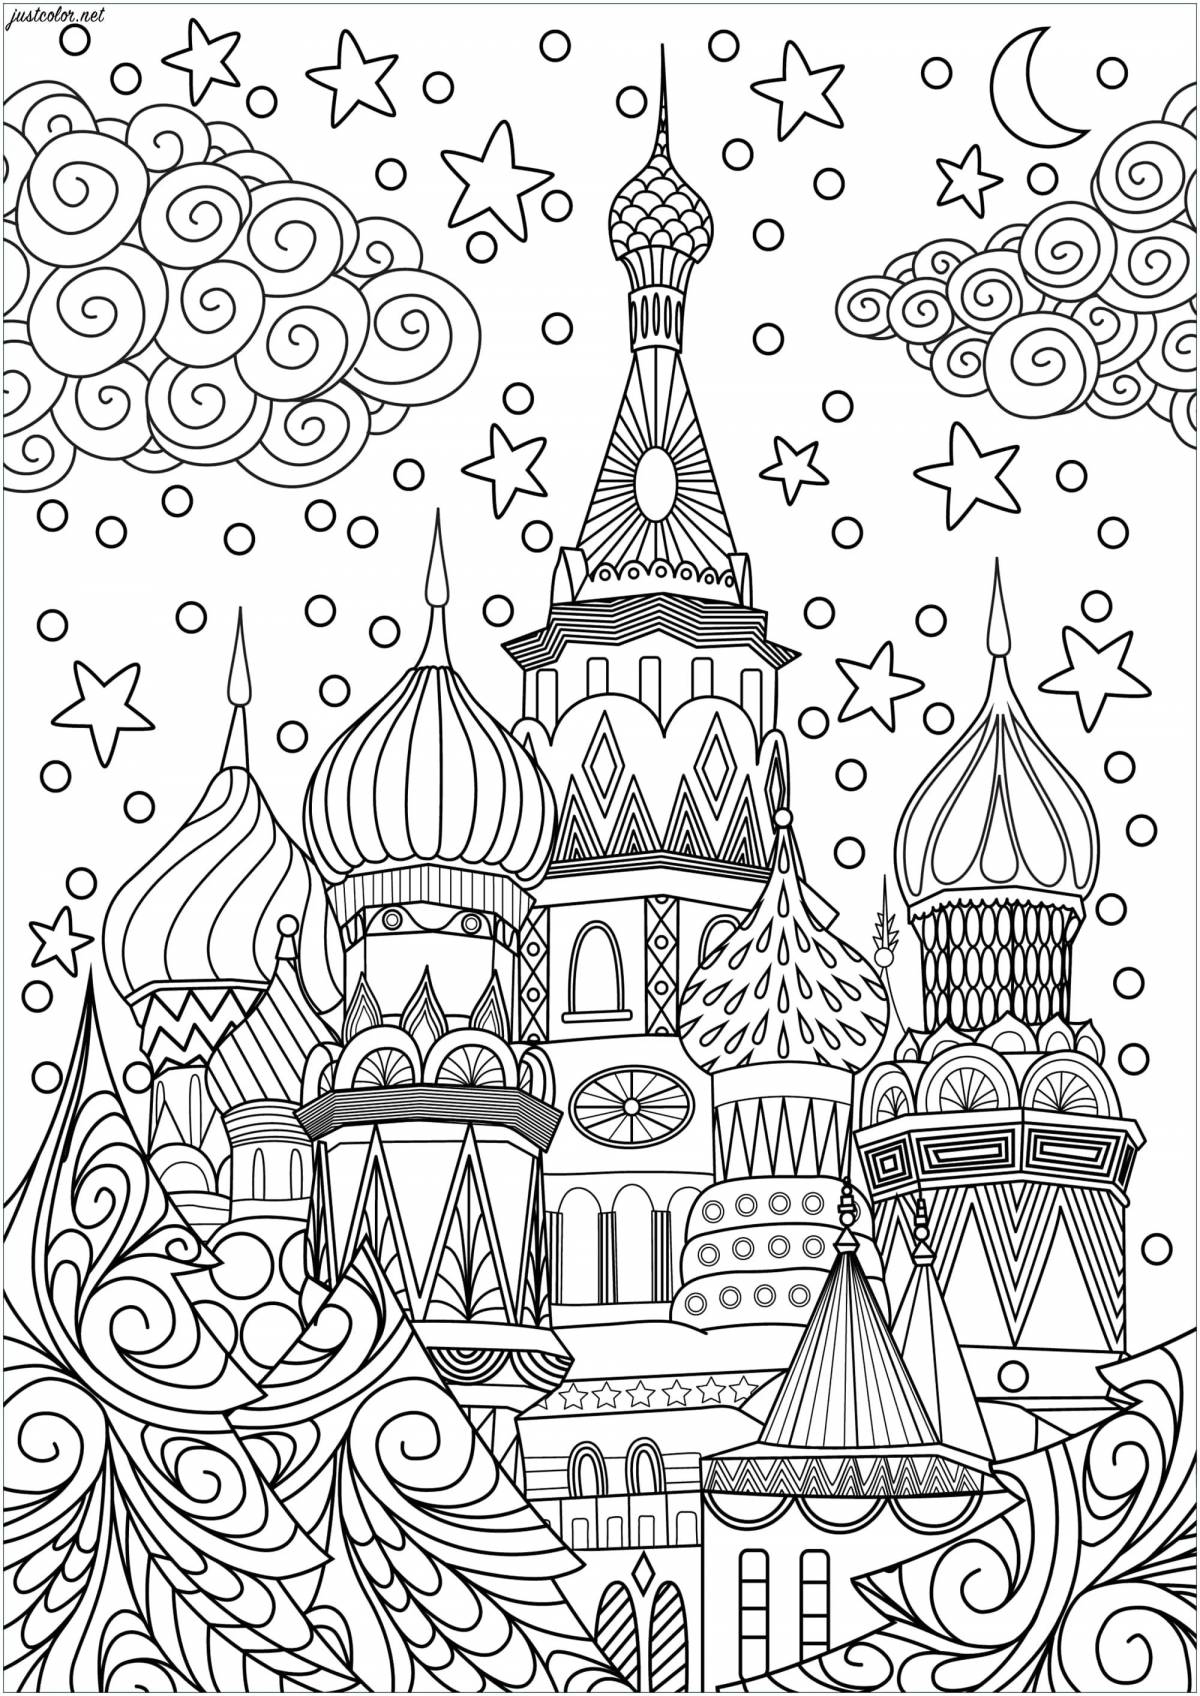 St. Basil's Cathedral for children #1